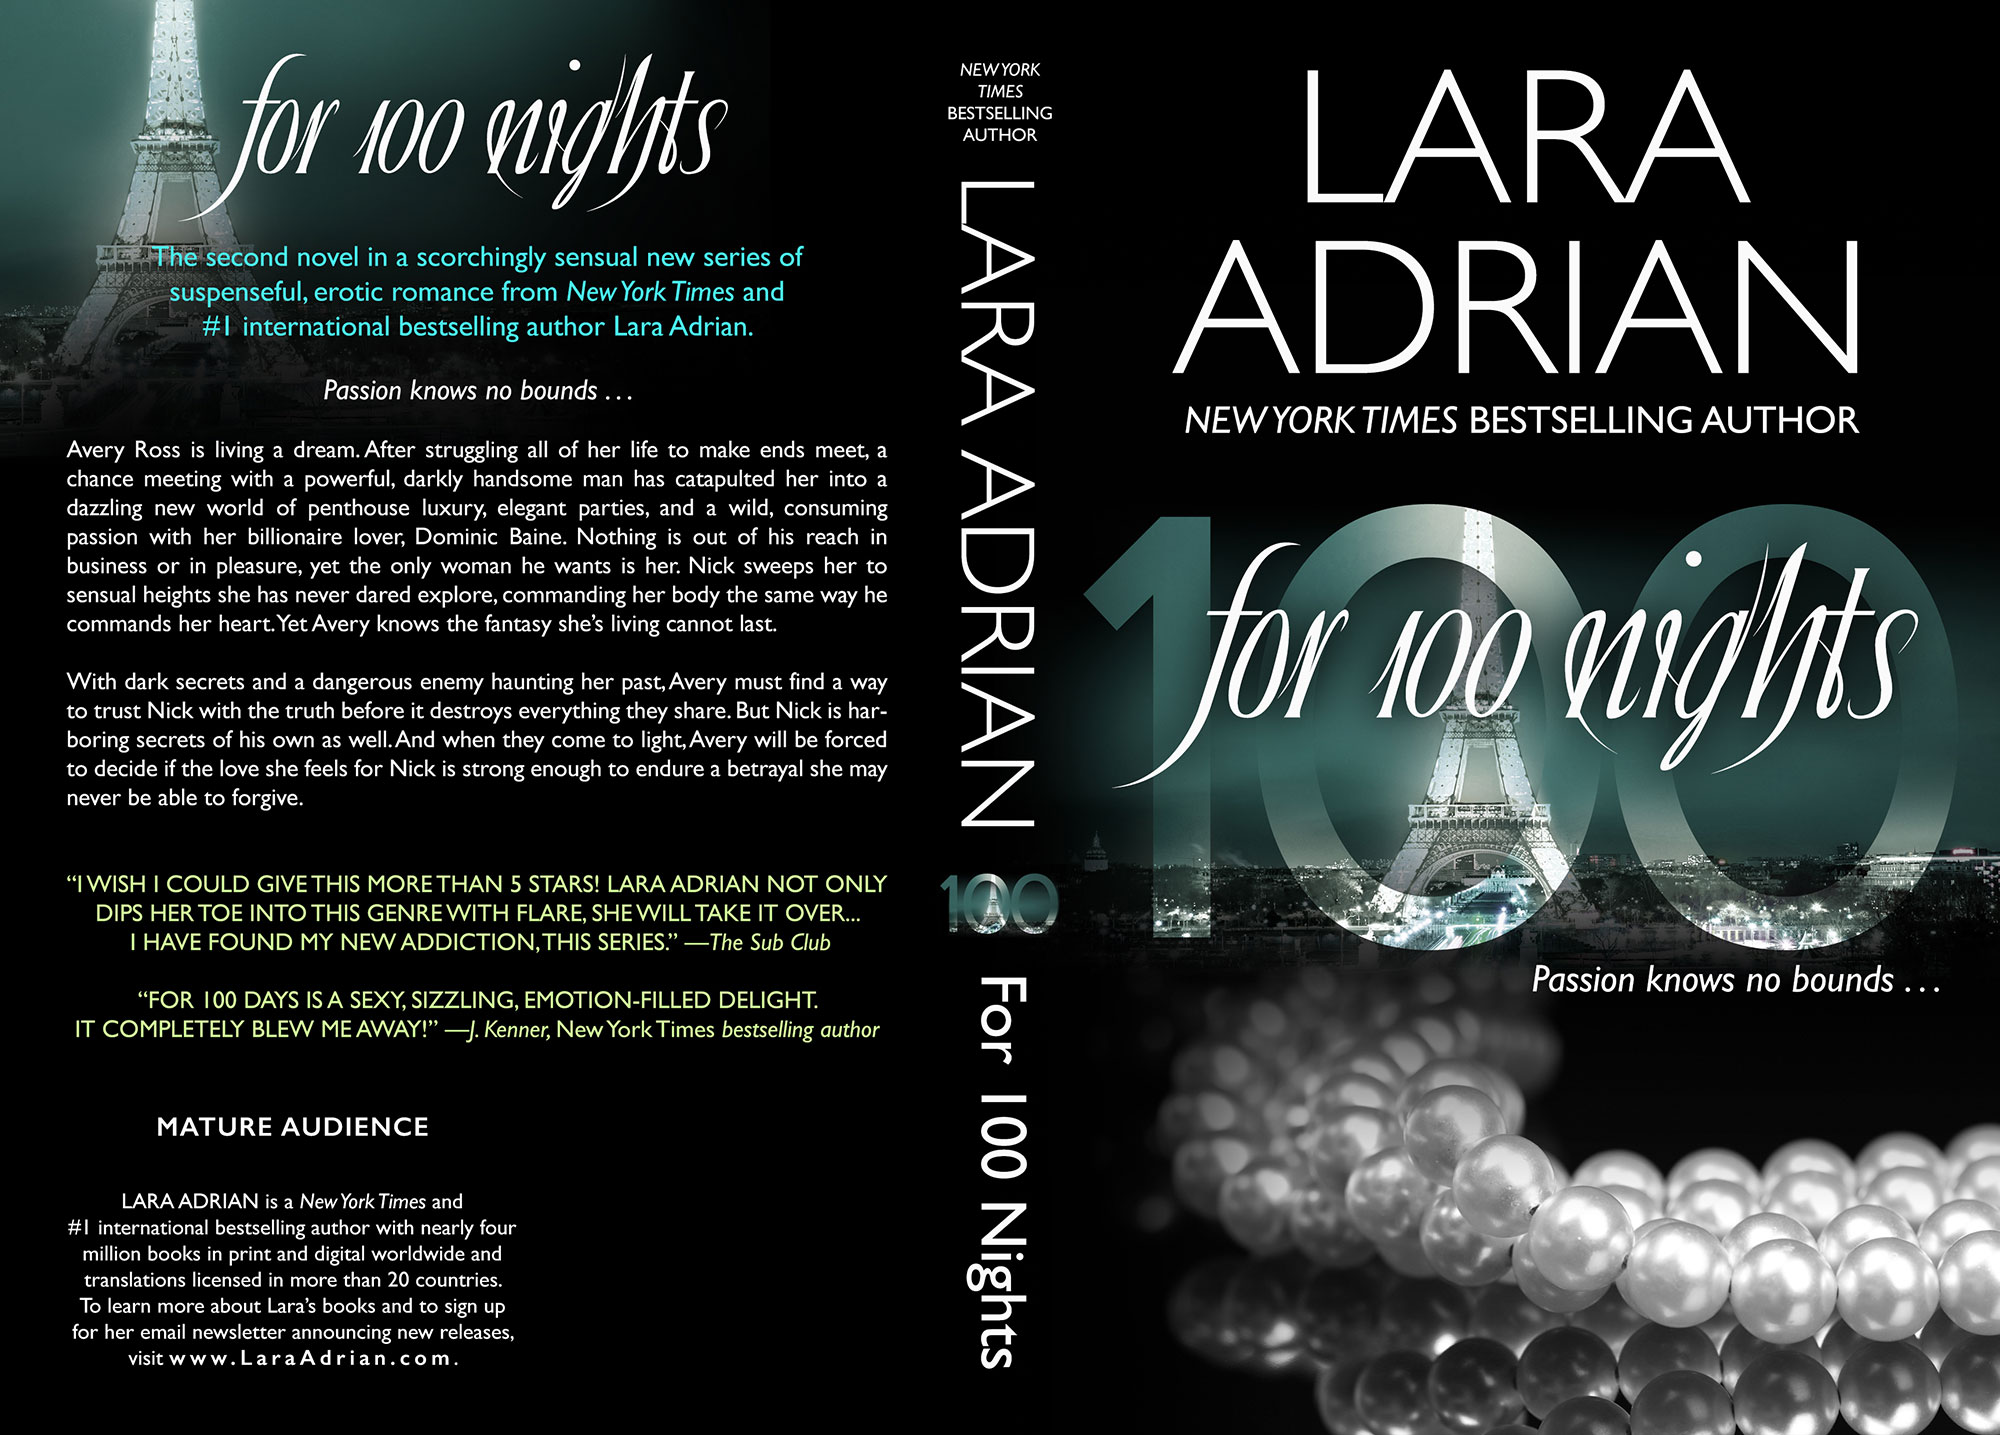 For 100 Nights by Lara Adrian (Print Coverflat)